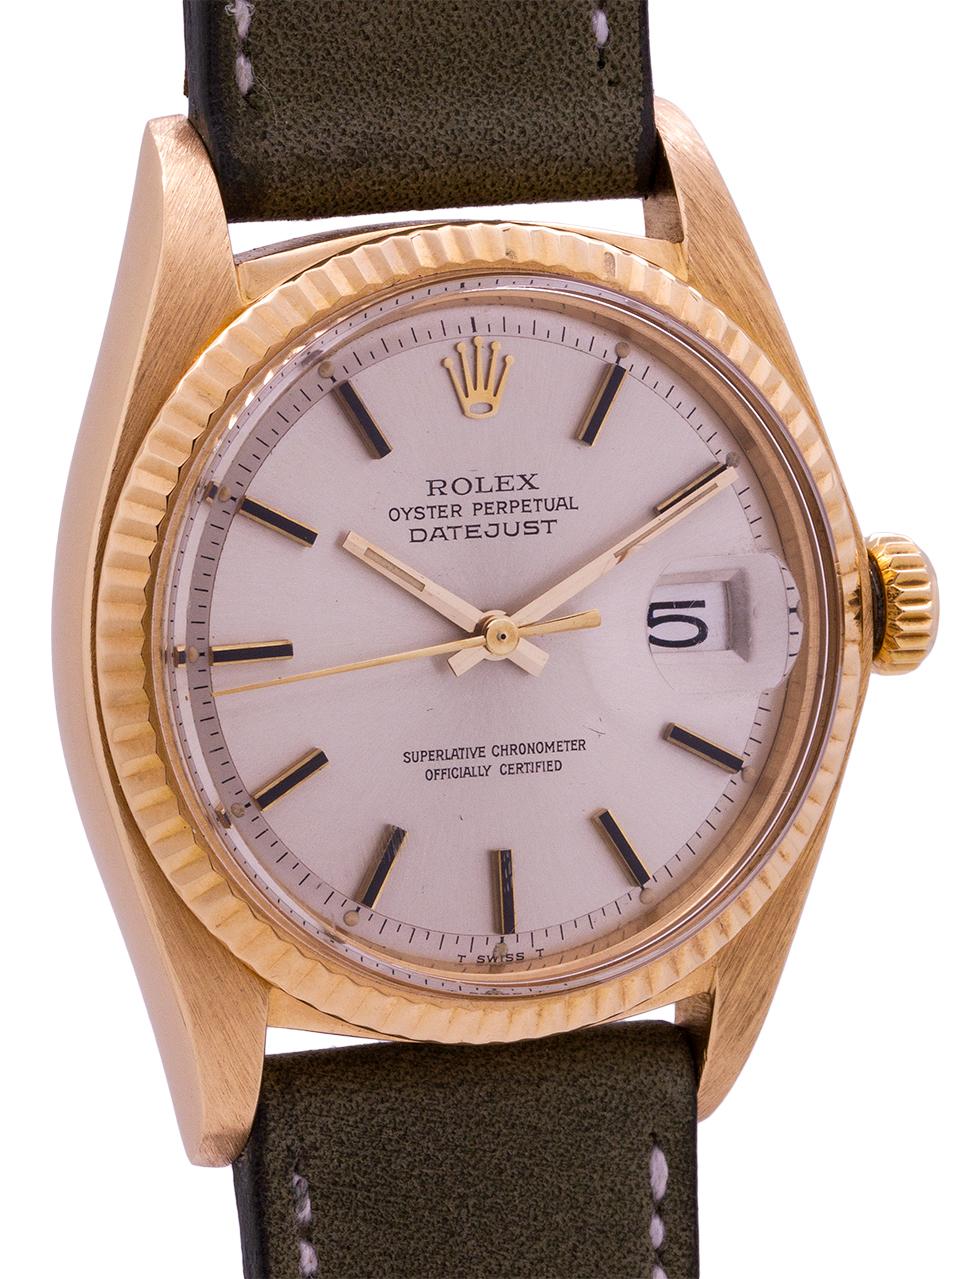 
Vintage Rolex 18K YG Datejust ref# 1601 serial number 3.4 million circa 1972. Featuring a 36mm diameter Oyster case with fluted bezel, acrylic crystal and signed screw down crown. With exceptionally clean, original silvered satin dial with applied